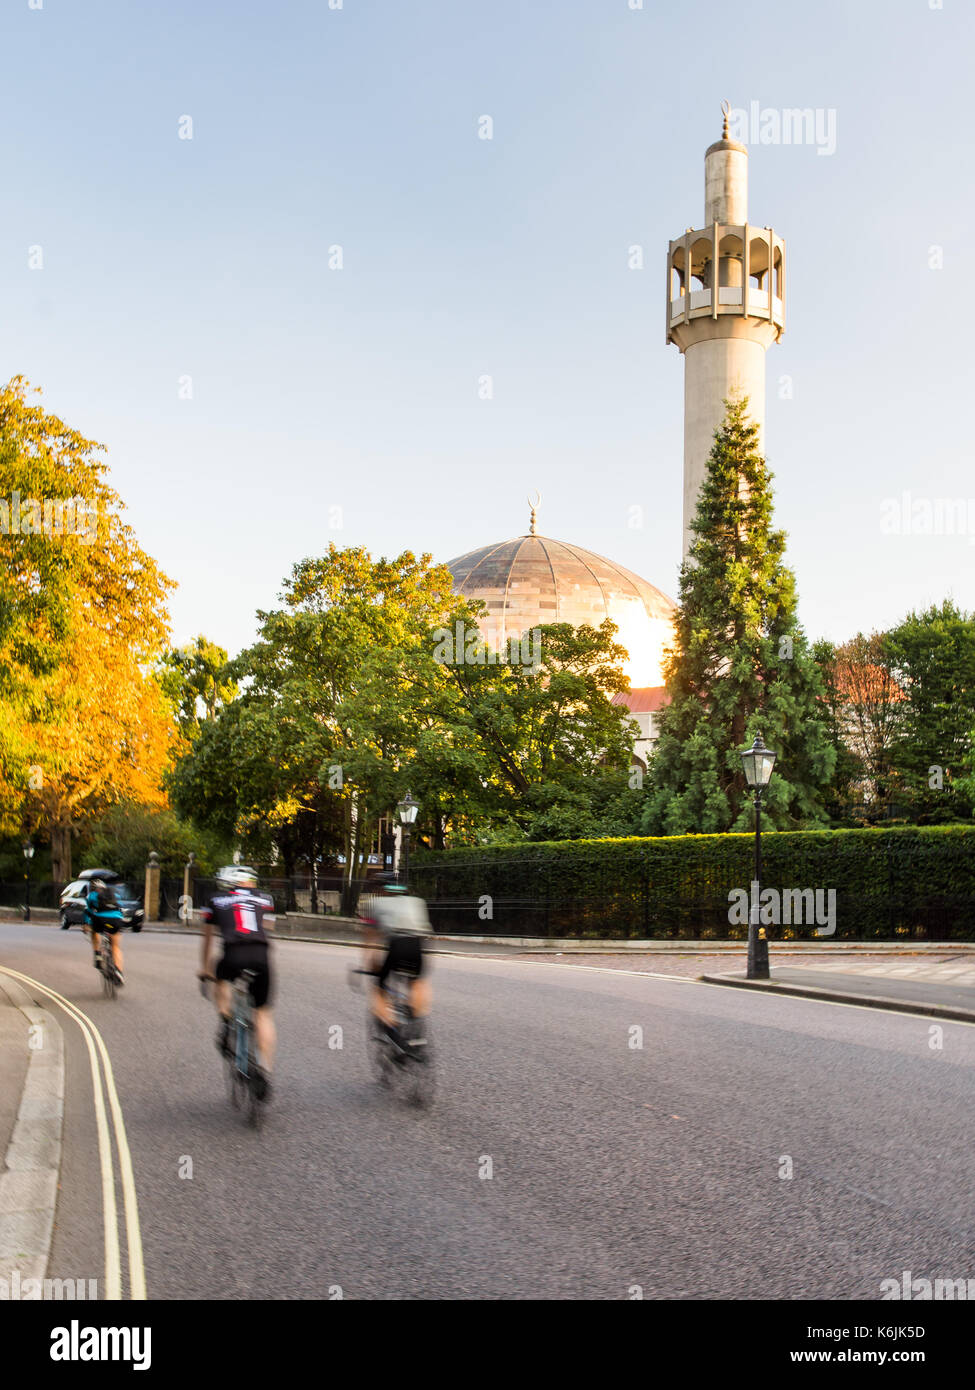 London, England, UK - August 30, 2016: Cyclists pass the London Central Mosque on Regents Park's Outer Circle Road. Stock Photo